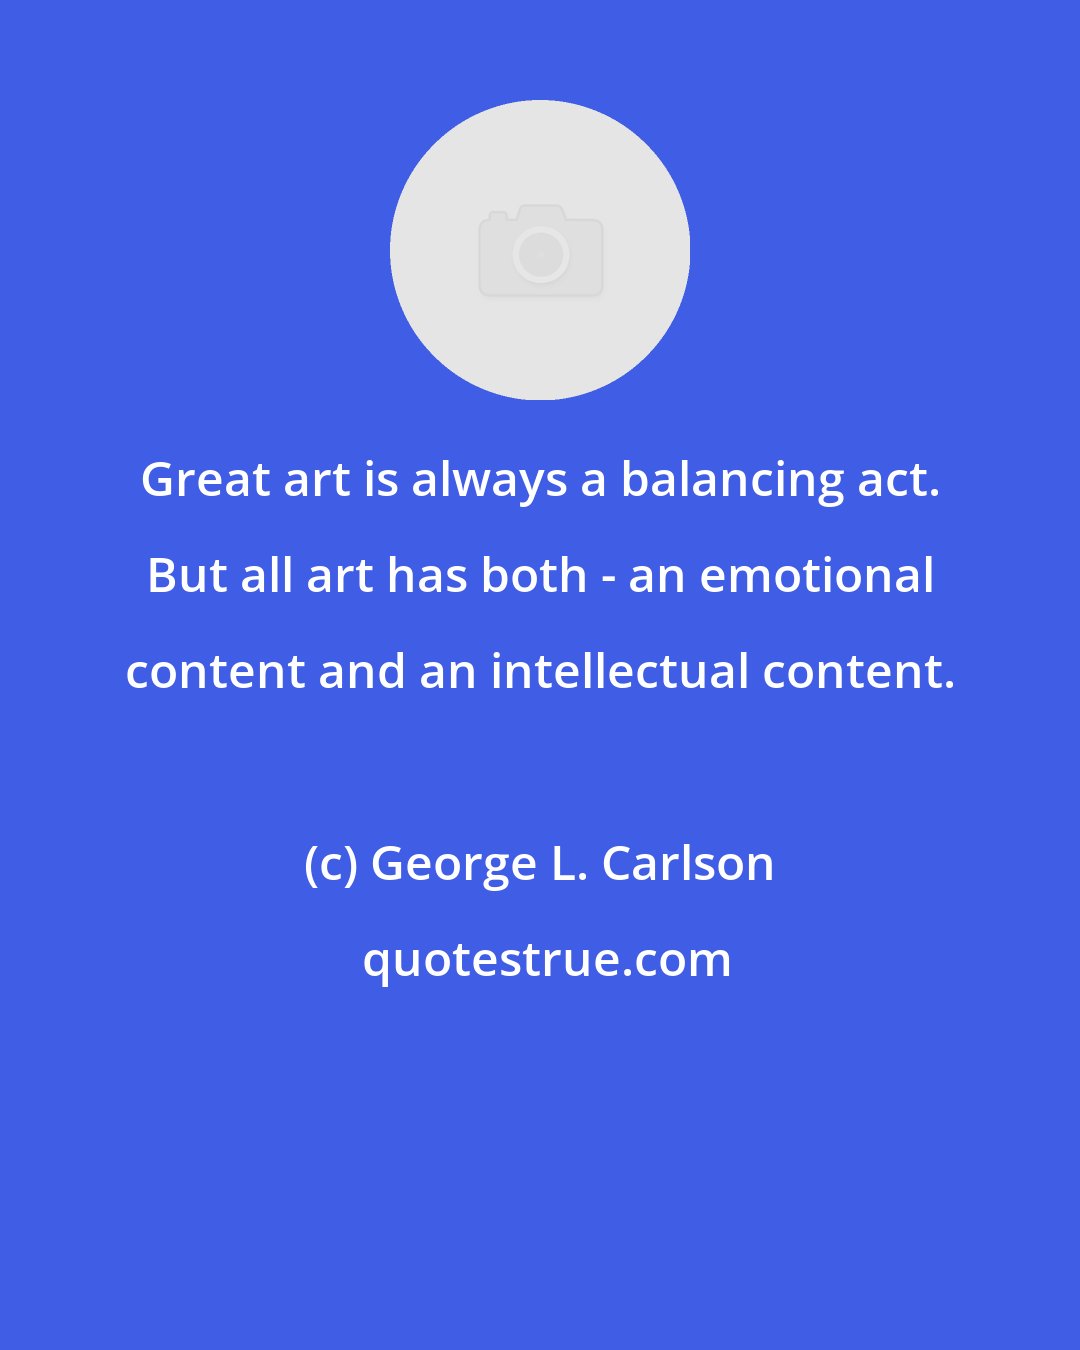 George L. Carlson: Great art is always a balancing act. But all art has both - an emotional content and an intellectual content.